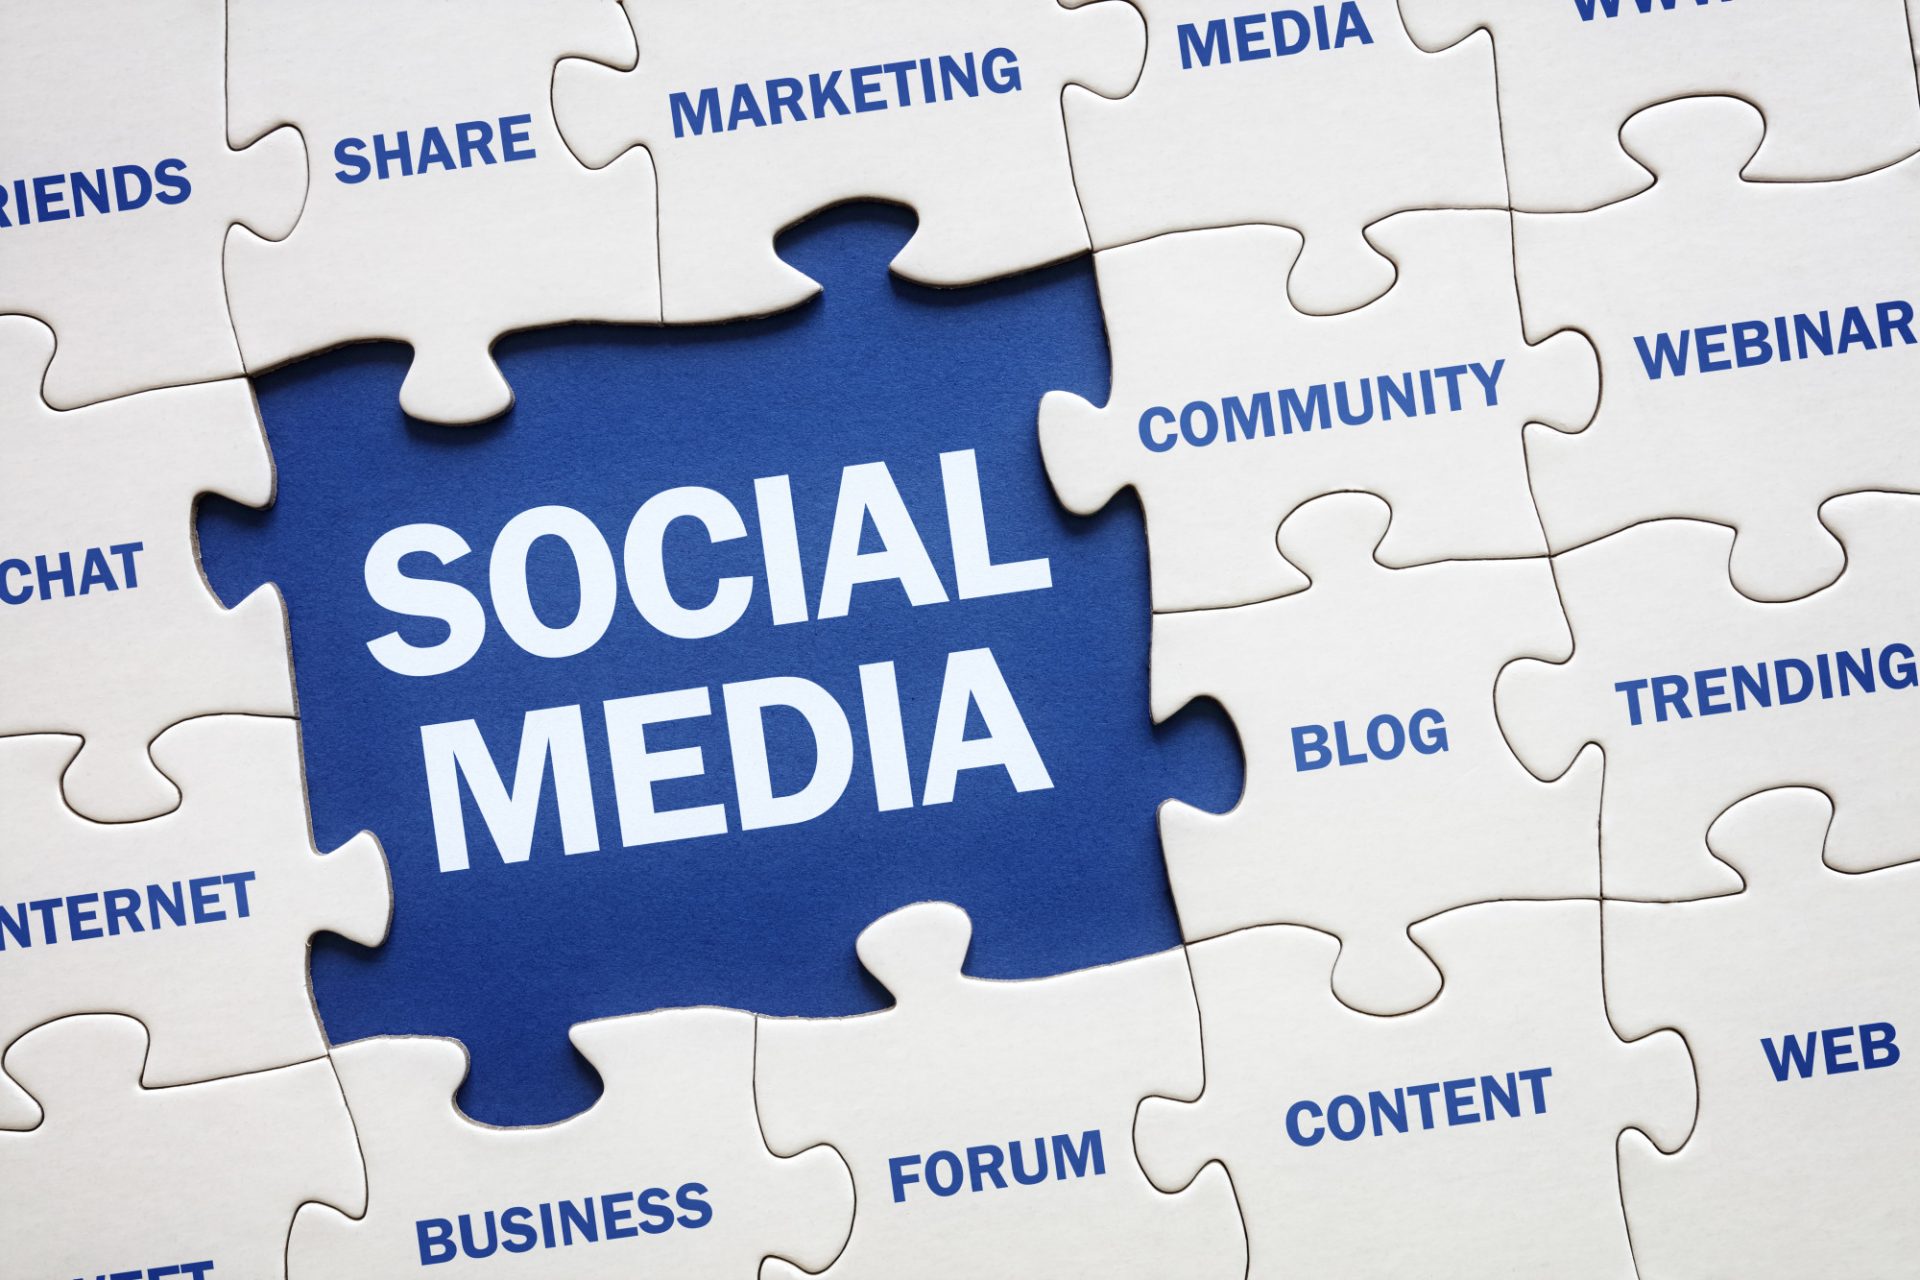 It’s All About The Timing: Efficiency Via Content Calendar Use for Social Media Marketing